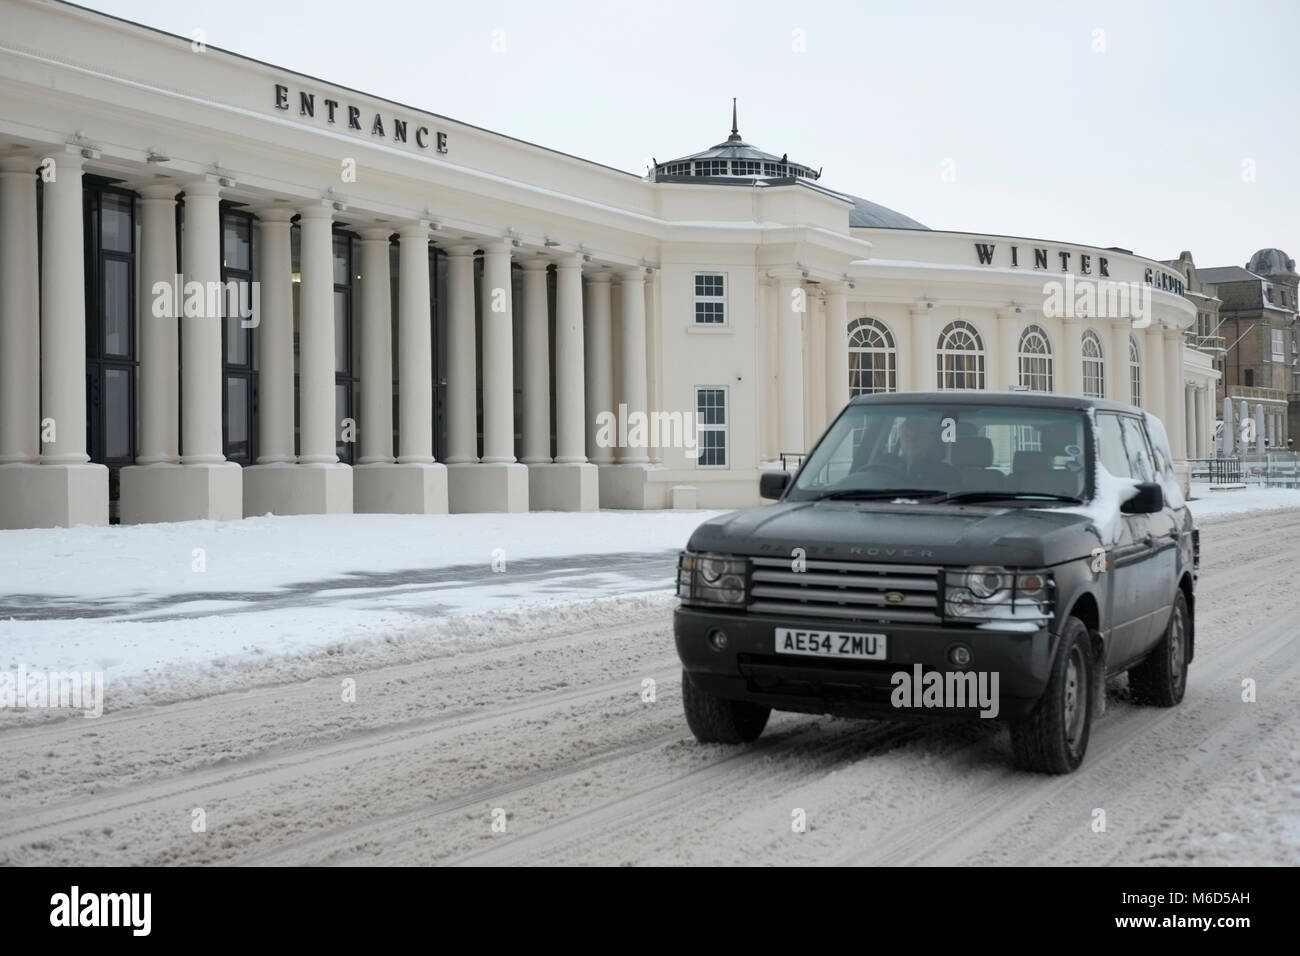 The Winter Gardens, Weston super mare. UK. 2nd March, 2018.A  four wheel drive vehicle braves the roads along the sea front after heavy snow Credit: Alamy Live News Stock Photo